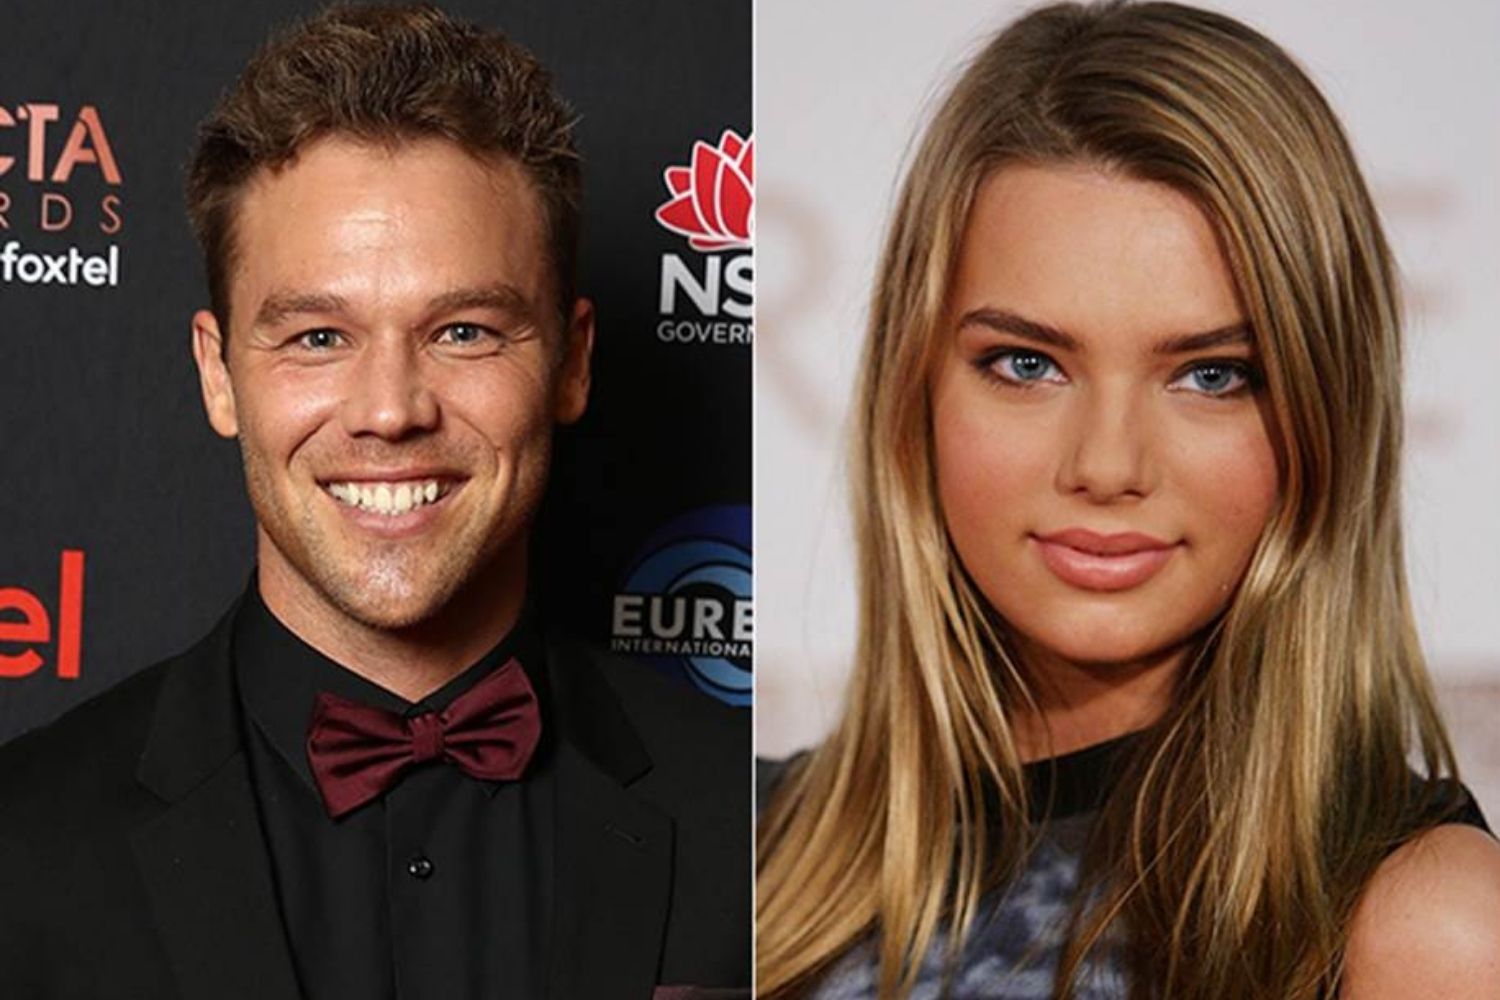 Lincoln Lewis and Indiana Evans